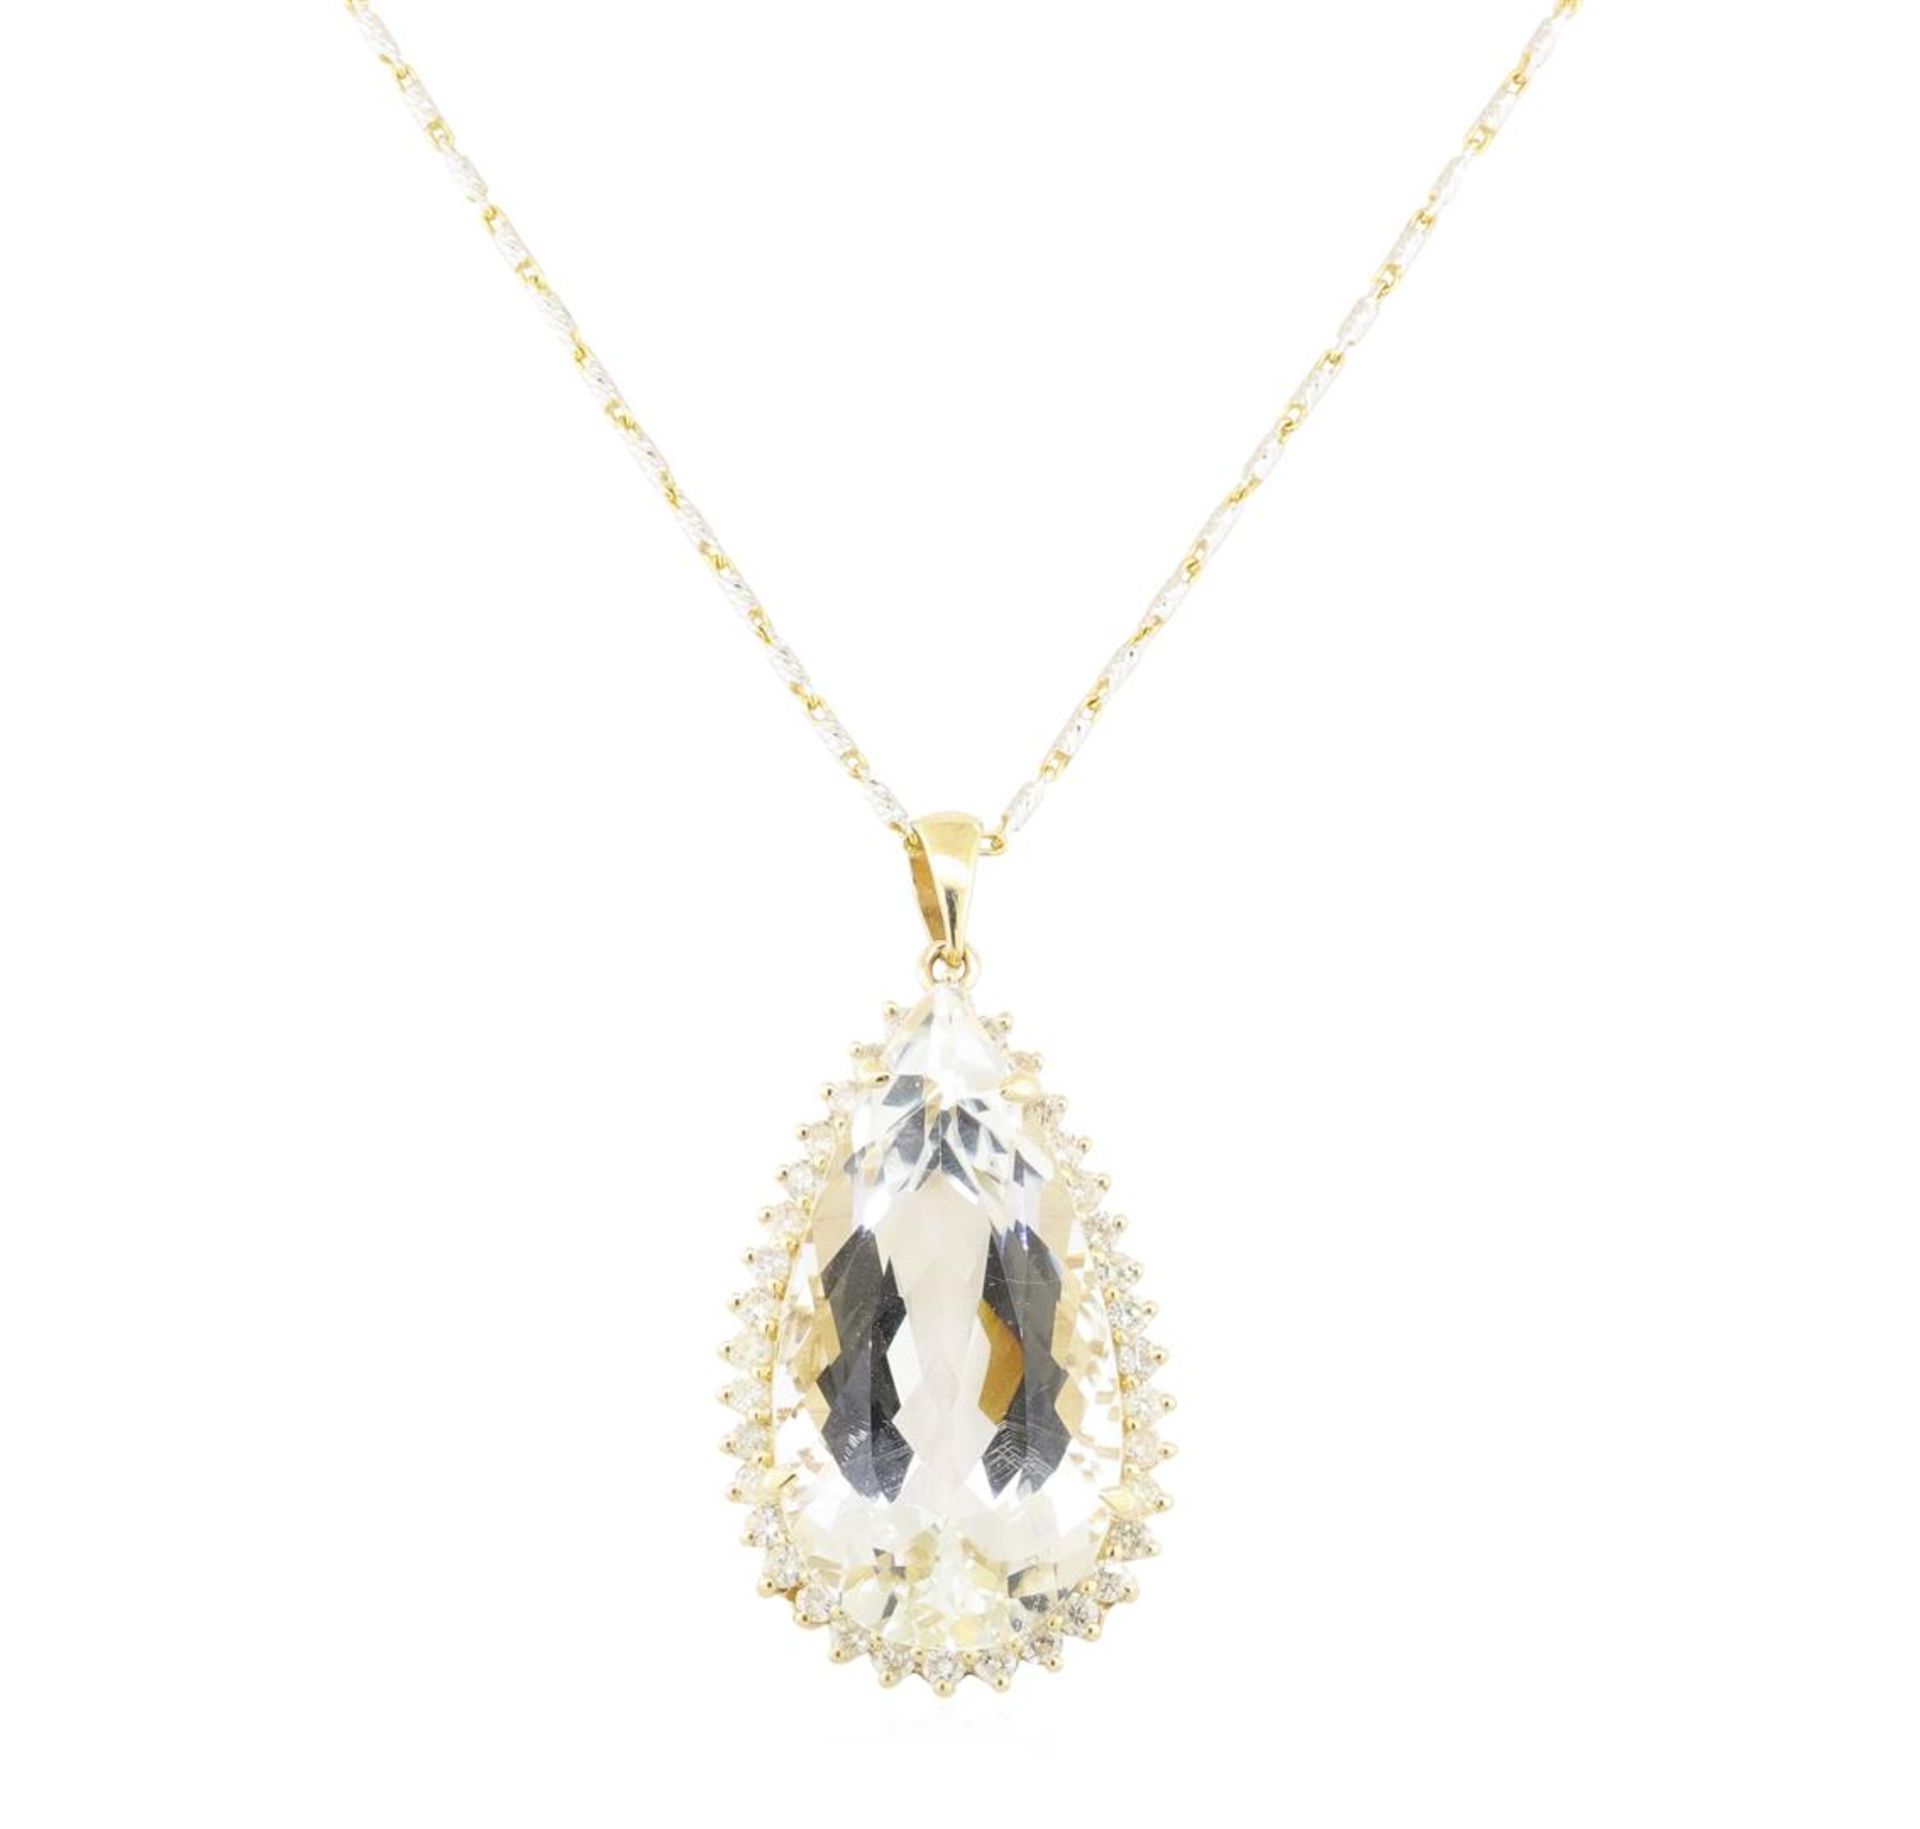 24.03ct Aquamarine and Diamond Pendant With Chain - 14KT Yellow Gold - Image 2 of 3